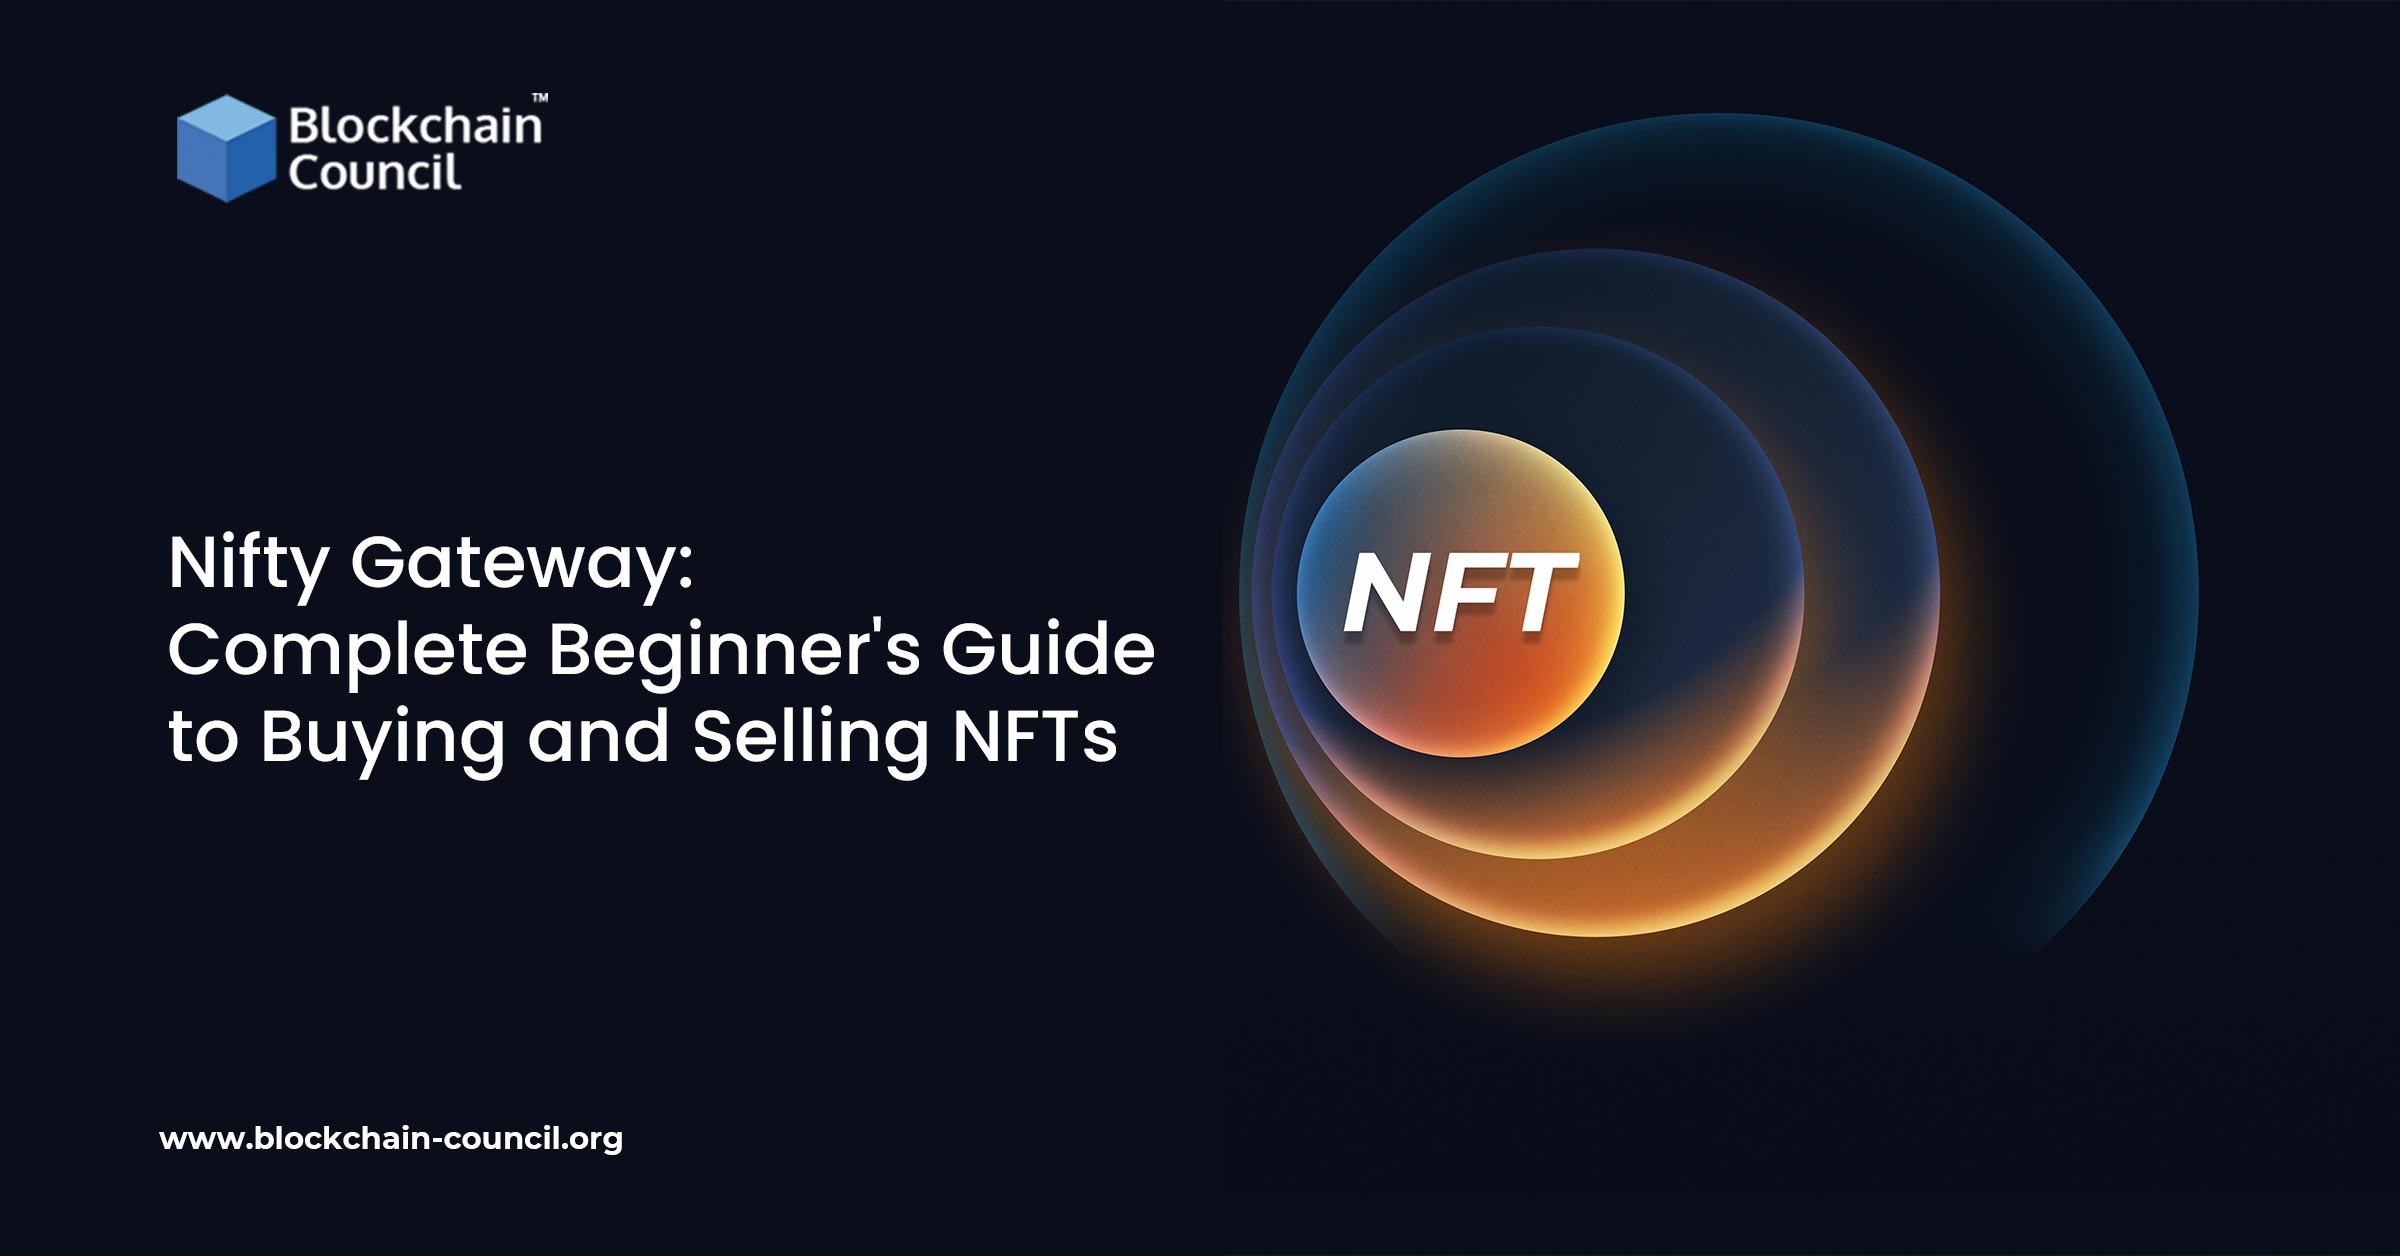 Nifty Gateway Complete Beginner's Guide to Buying and Selling NFTs